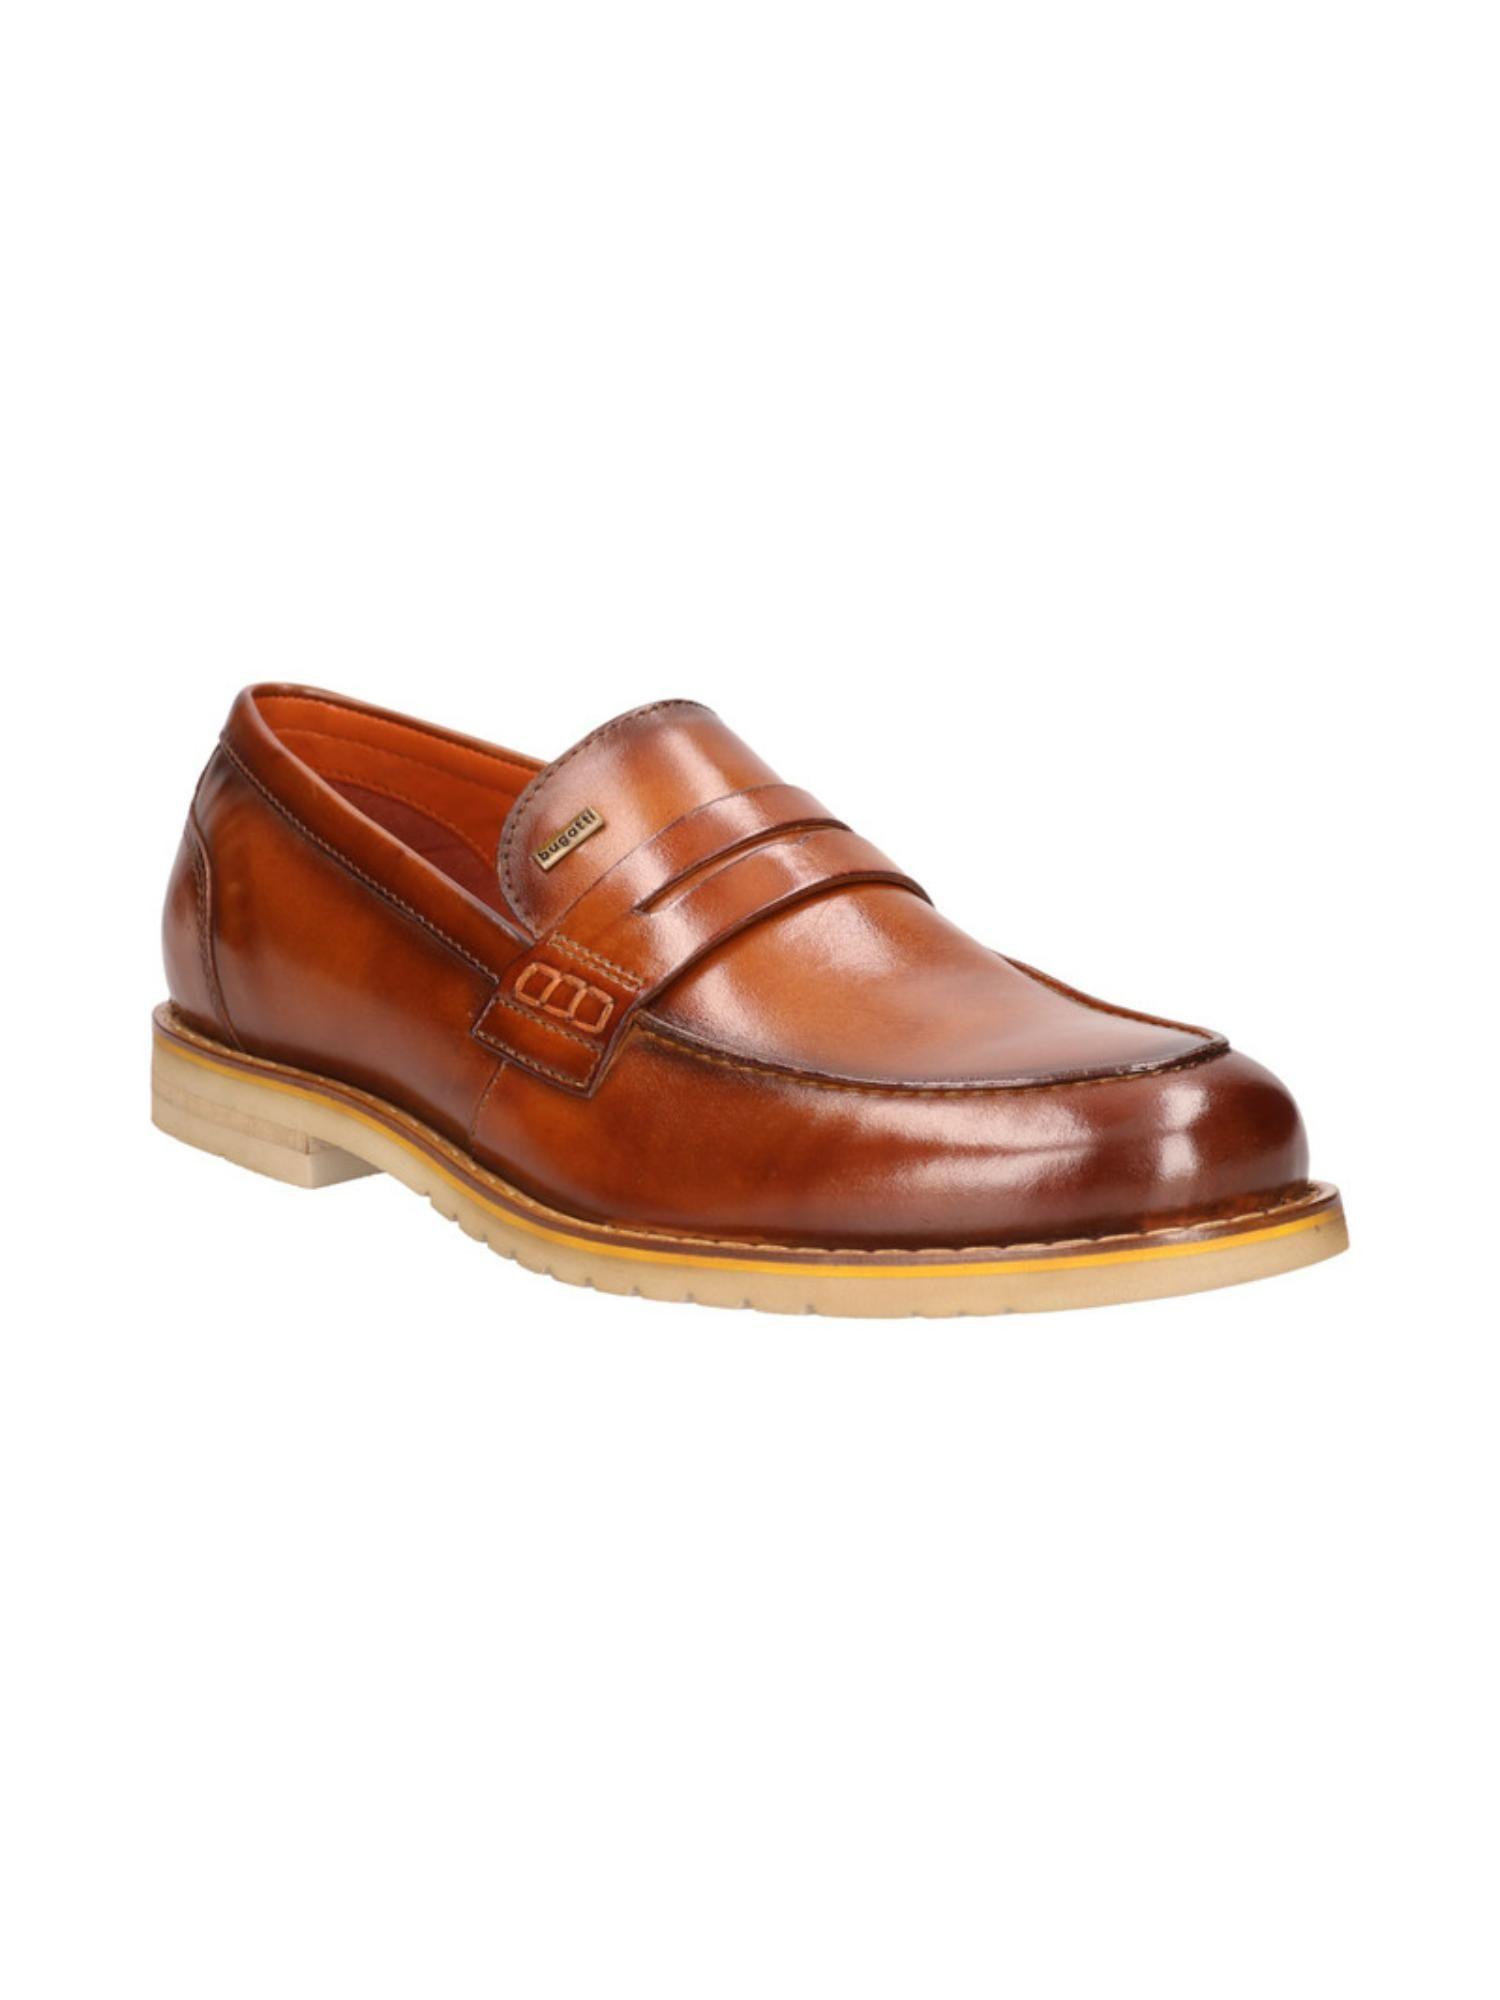 caleo revo exko brown mens leather penny loafers